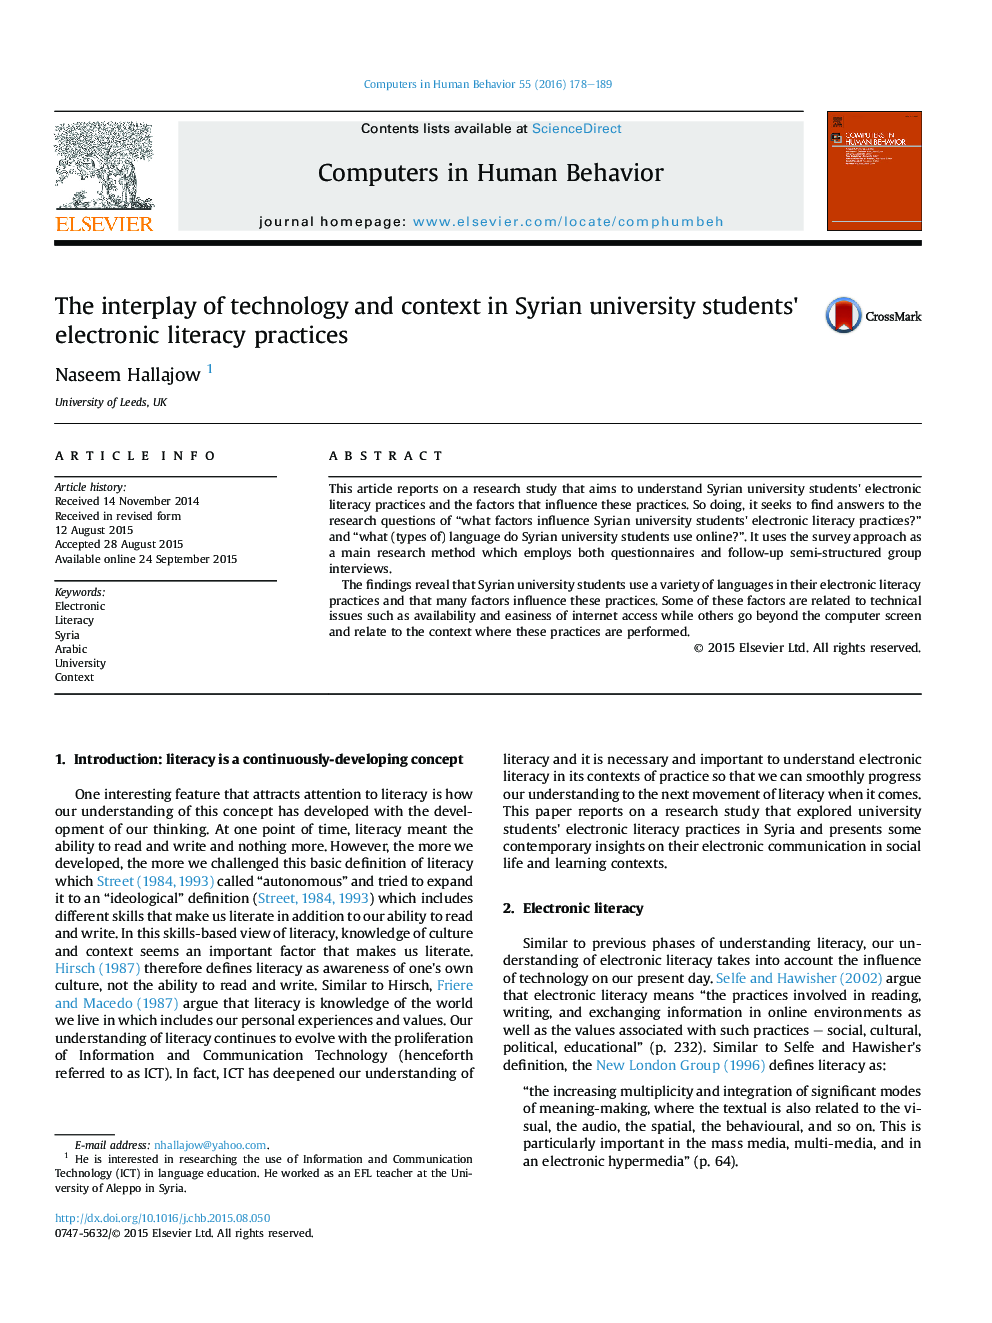 The interplay of technology and context in Syrian university students' electronic literacy practices